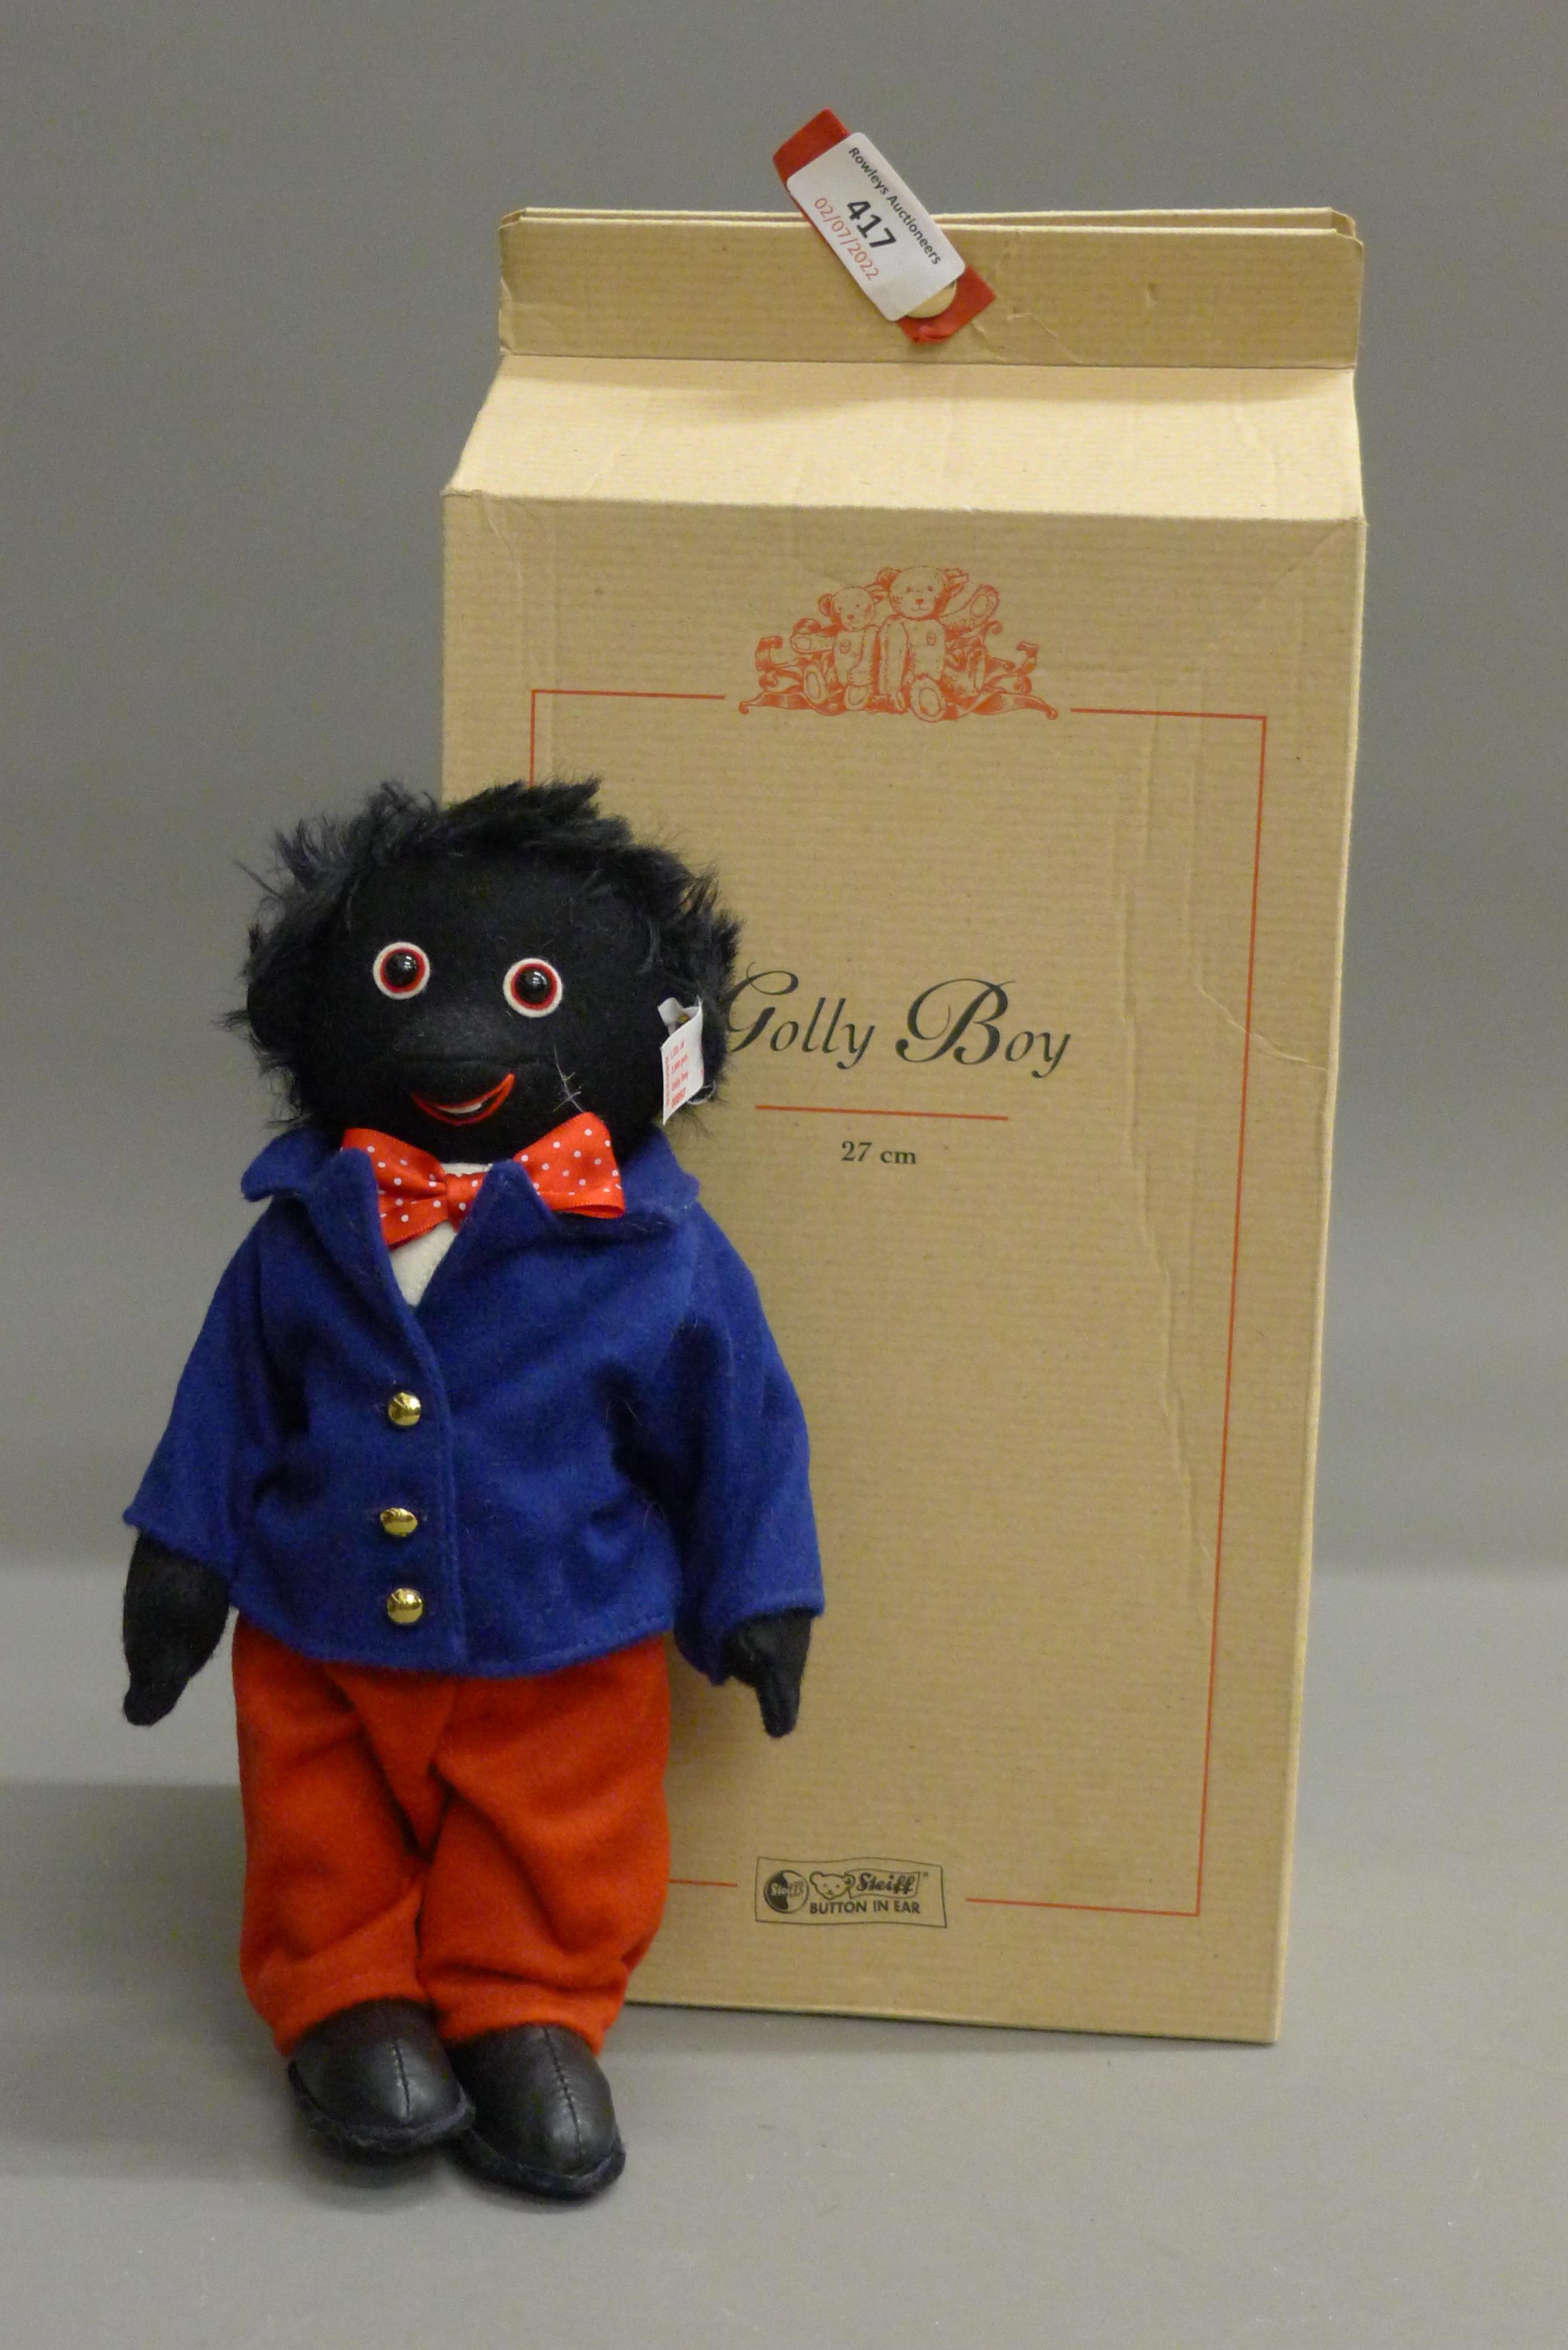 A Steiff Golly Boy, limited edition, numbered 897/2000, with original box and certificate.